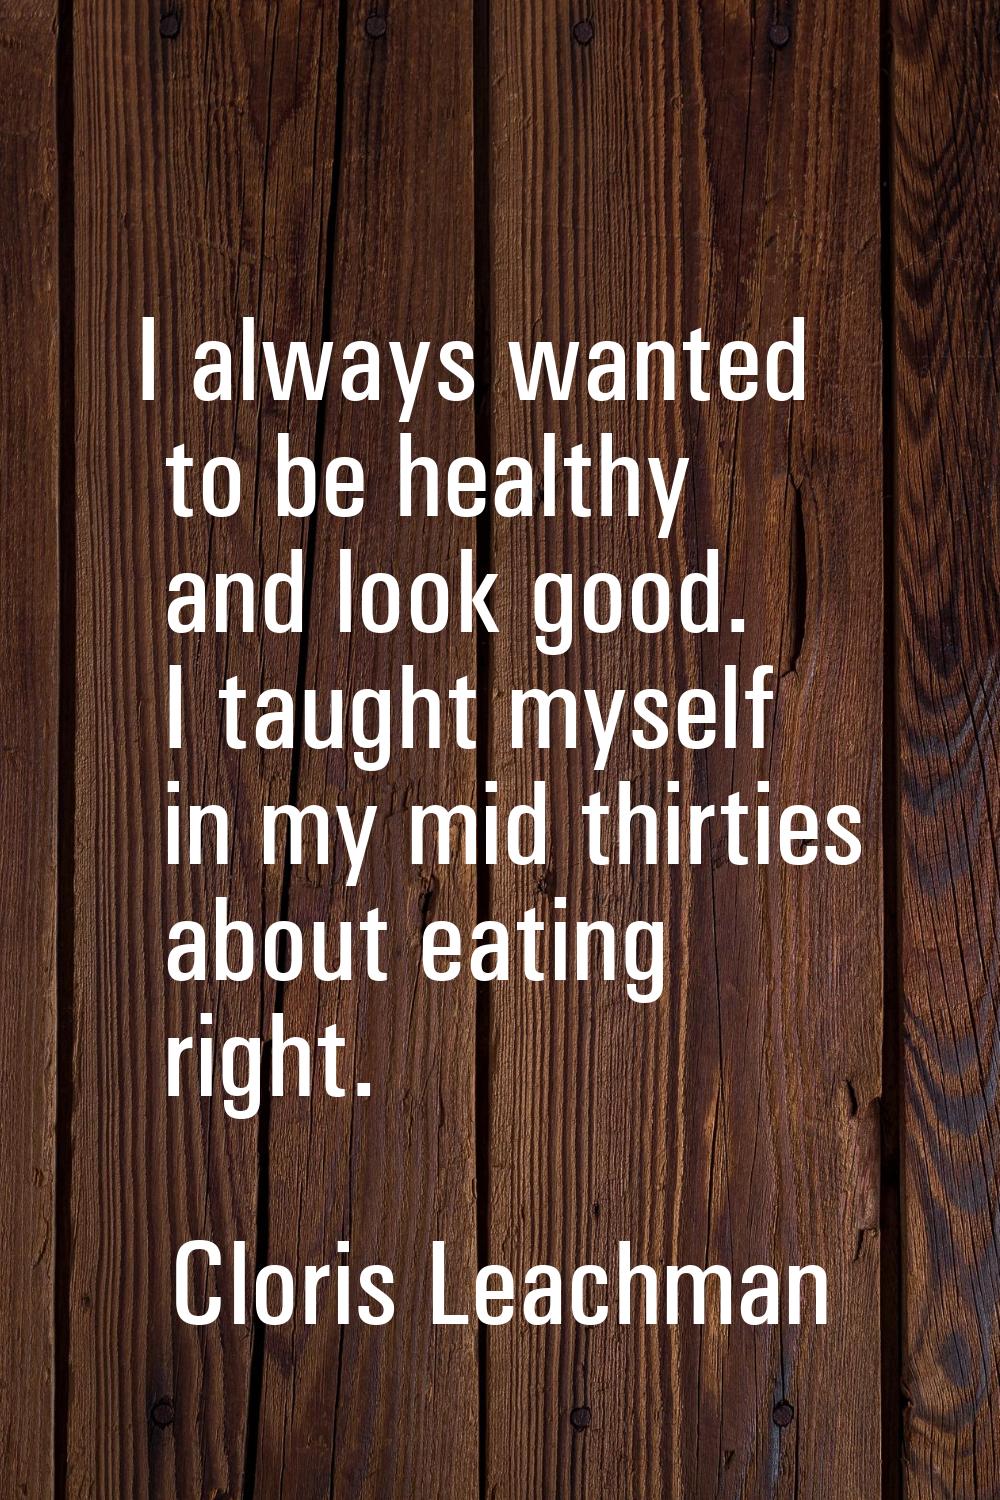 I always wanted to be healthy and look good. I taught myself in my mid thirties about eating right.